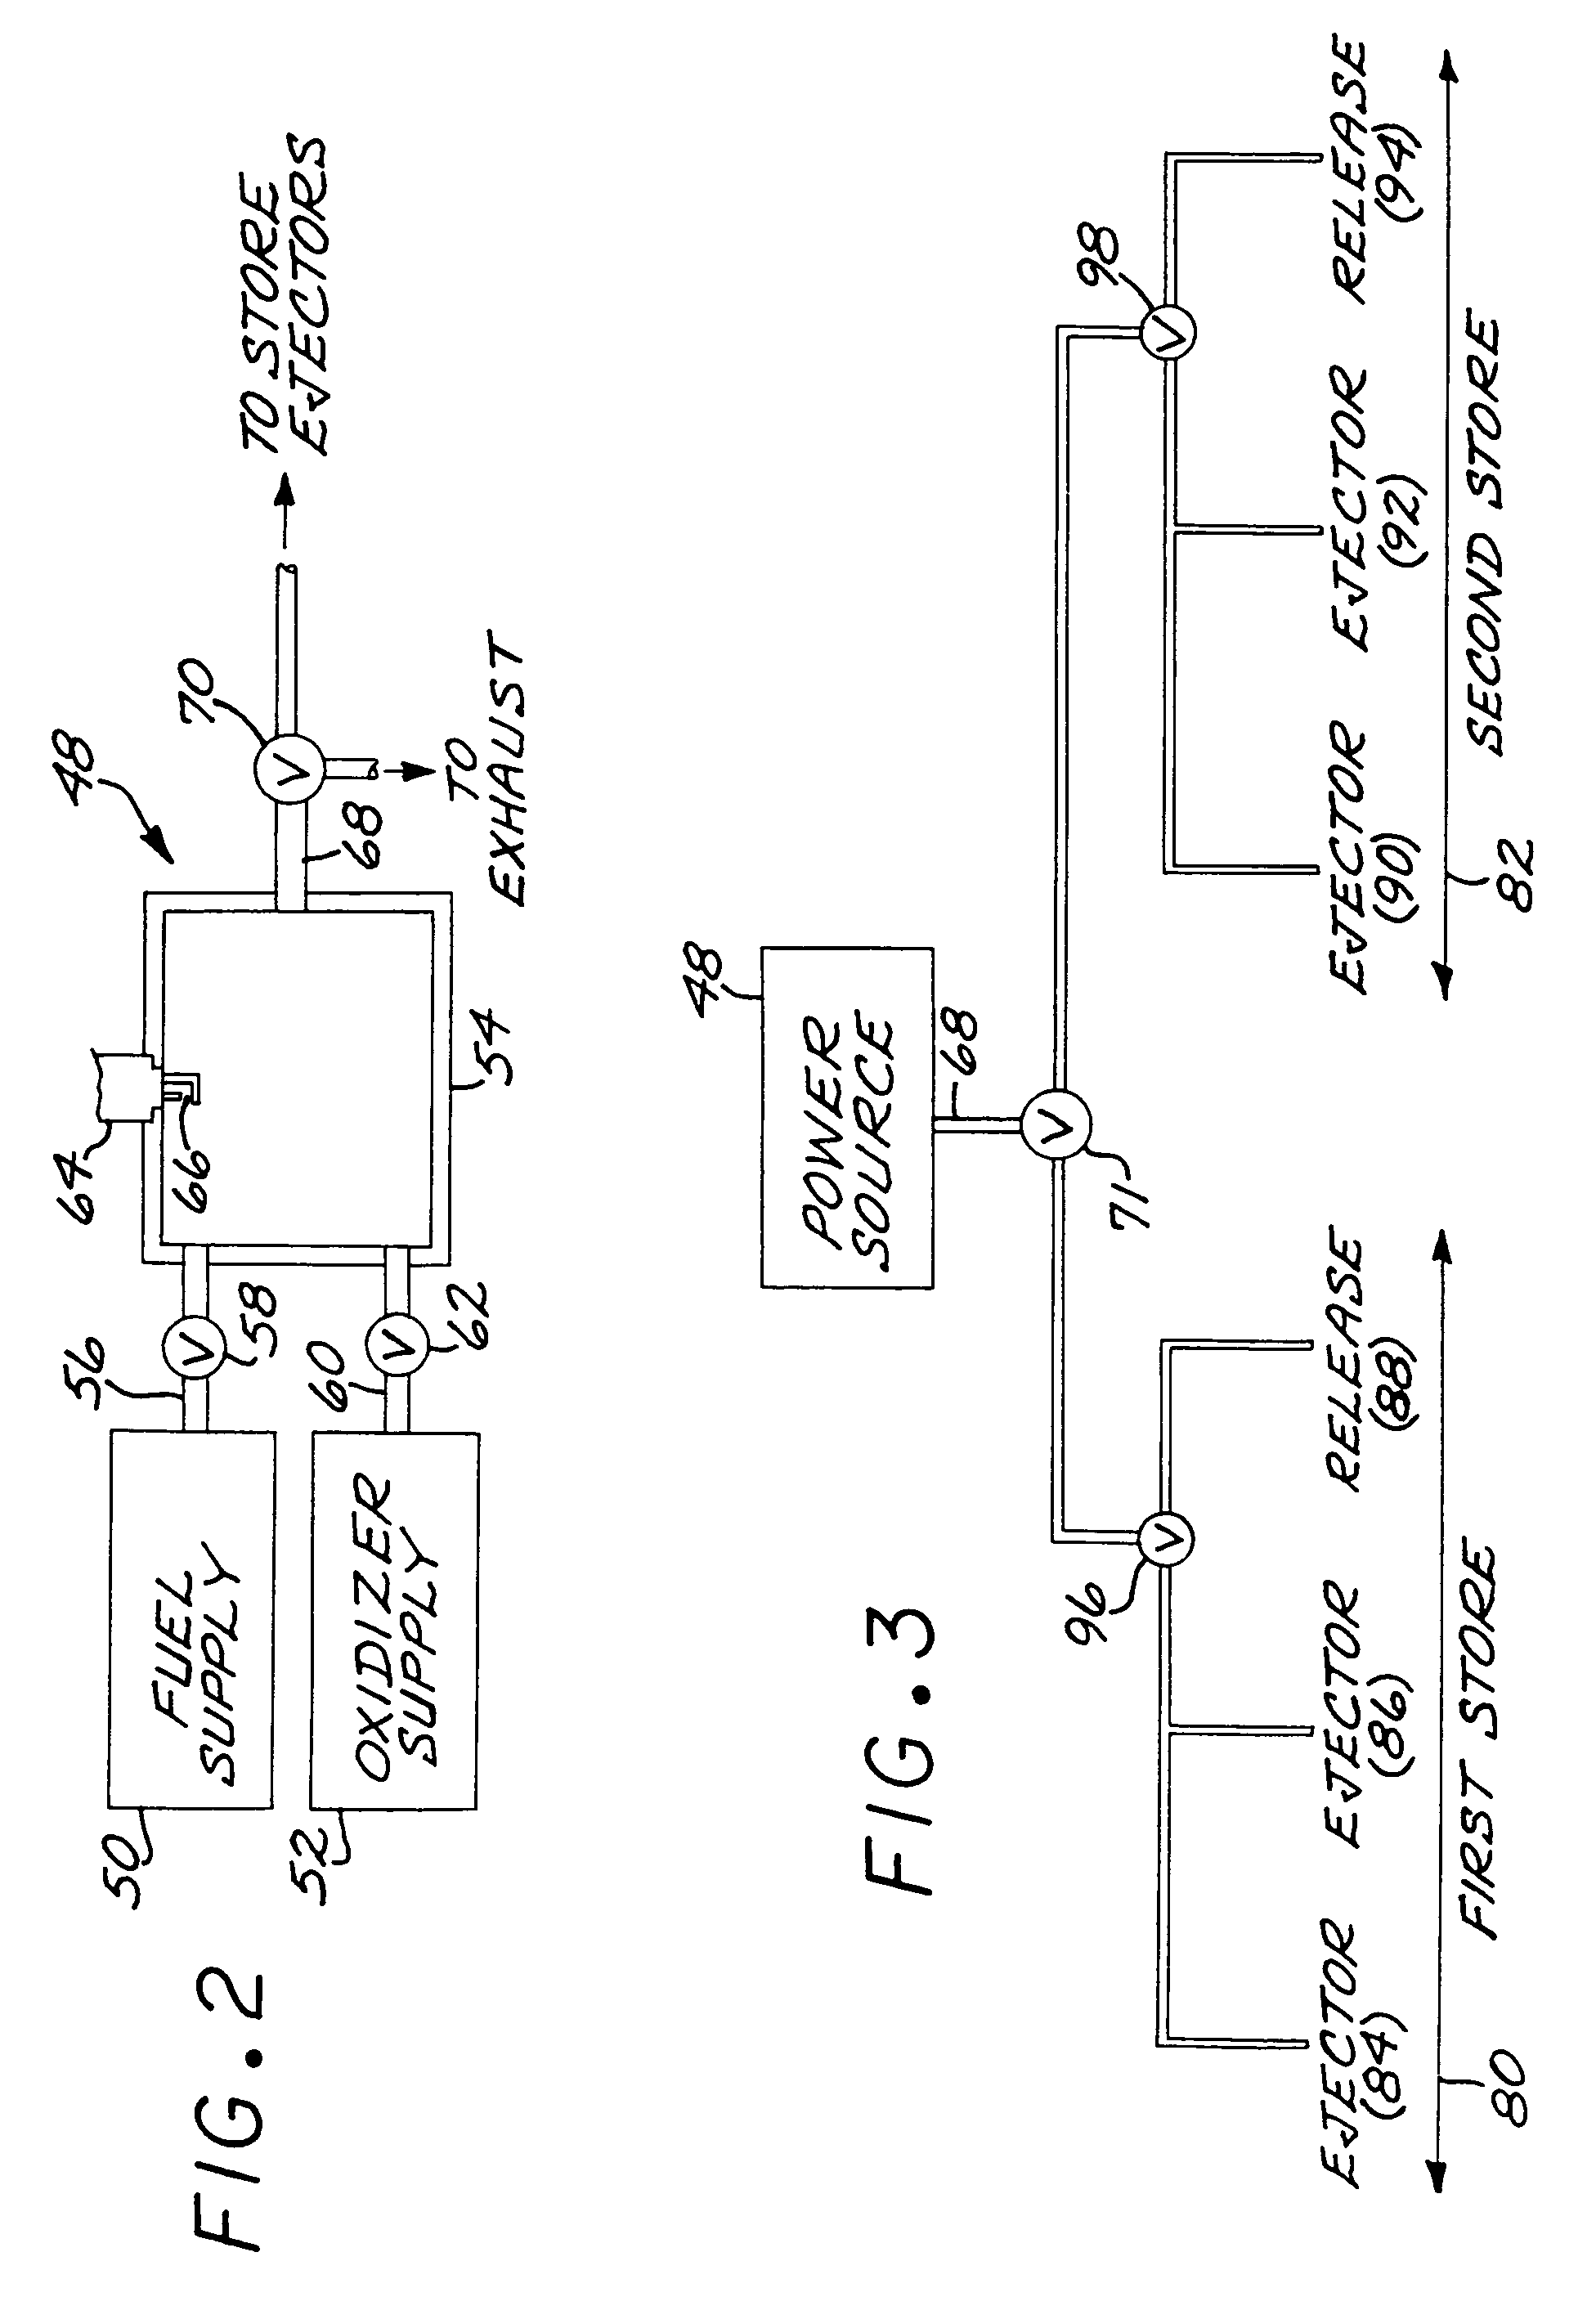 Store ejection system utilizing a mixed fuel and oxidizer in a power source